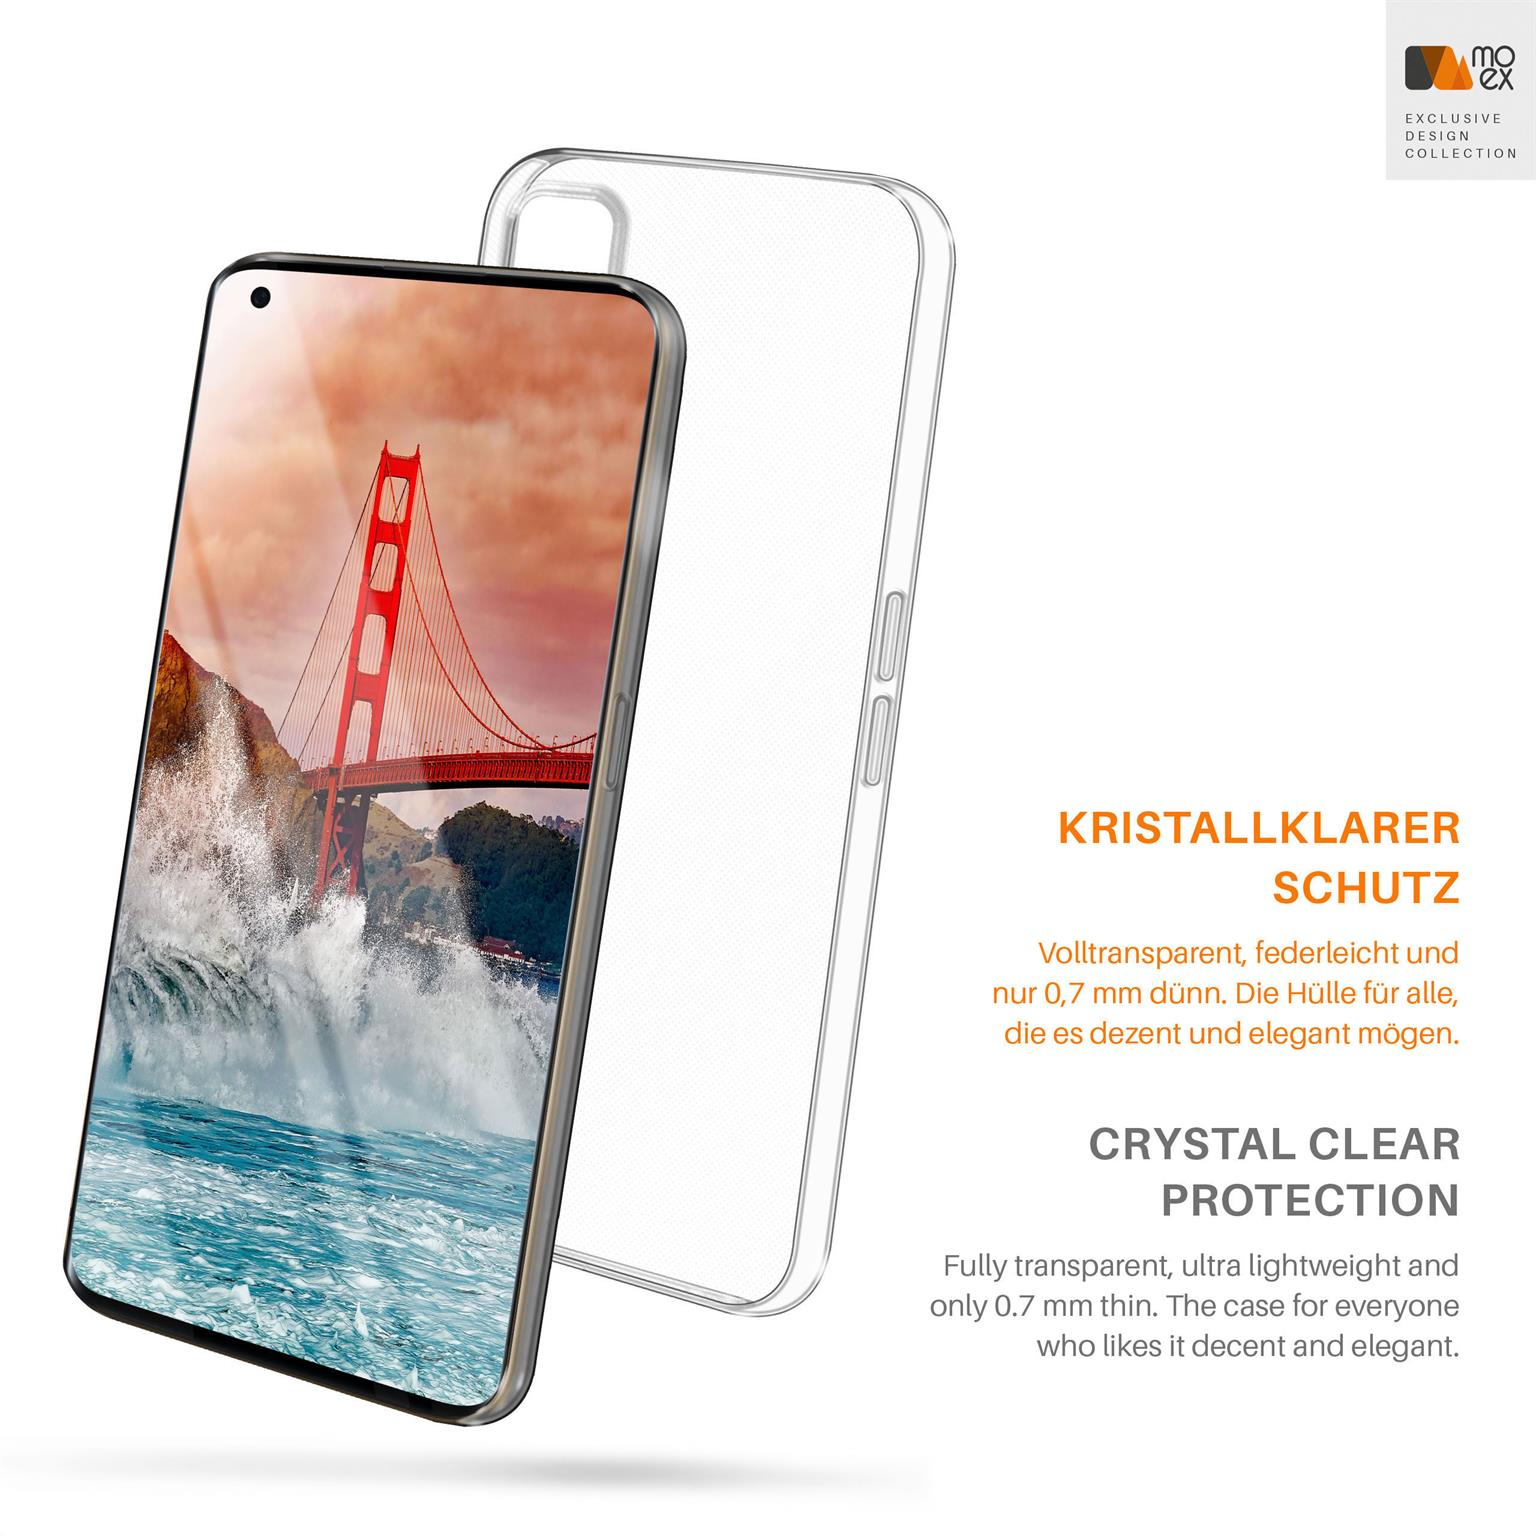 X2 Find Oppo, Backcover, Aero Crystal-Clear Case, MOEX Pro,